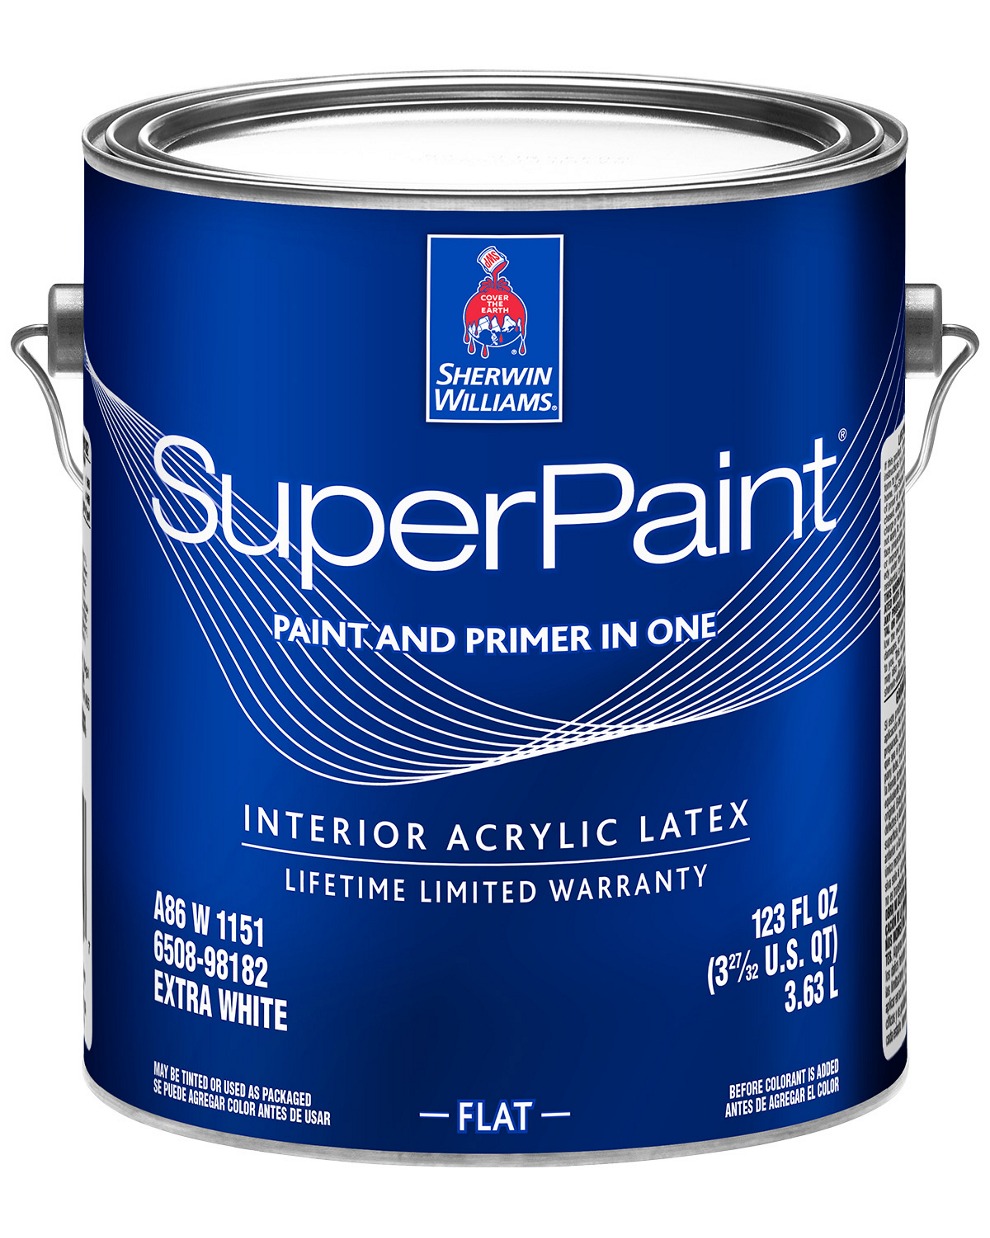 SuperPaint applied professionally by Meticulous Painting - Fall River, MA